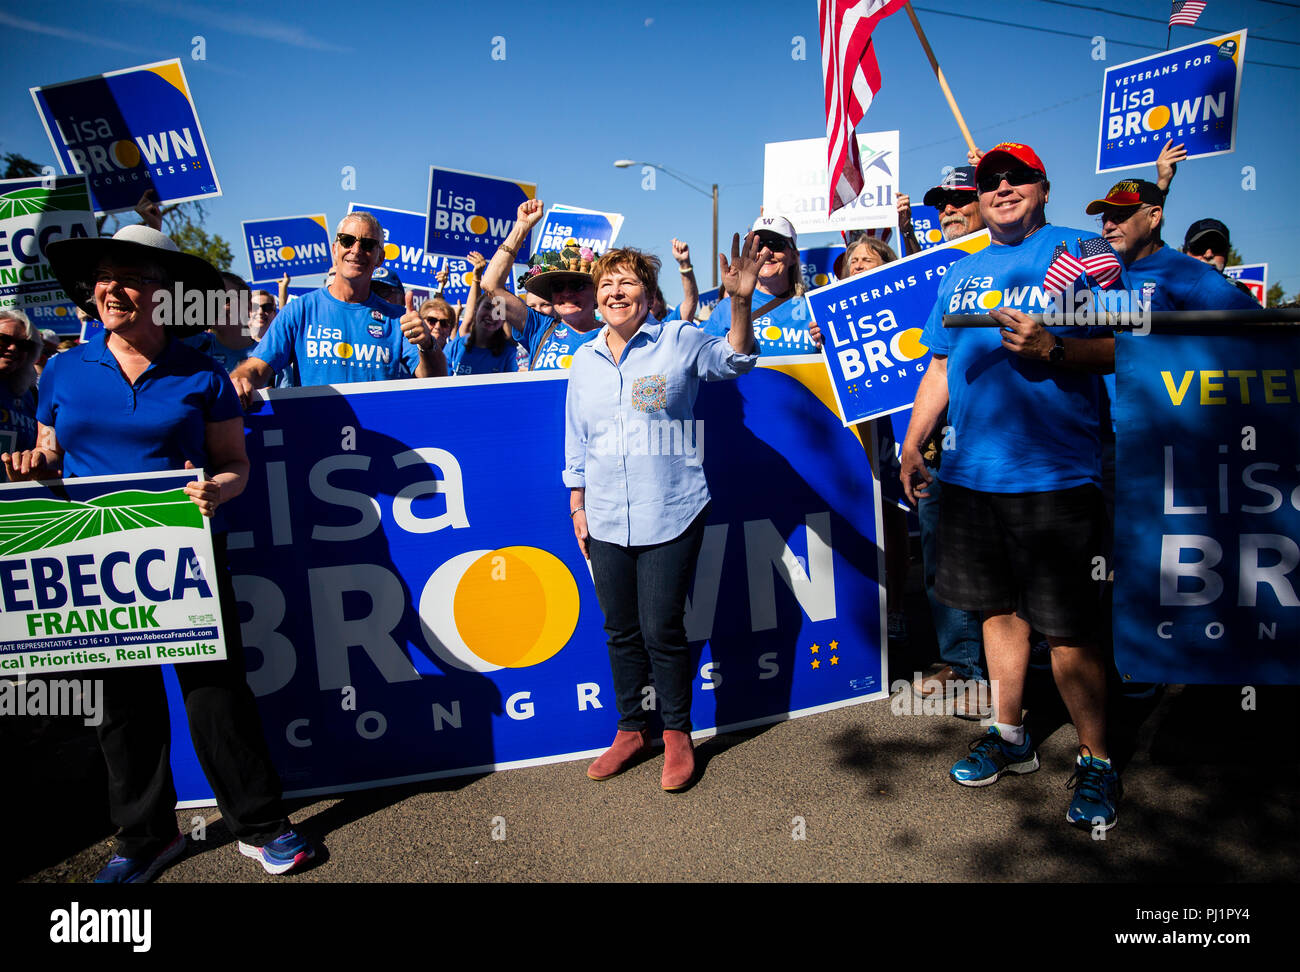 Lisa Brown, a Democratic candidate running to represent Washington's 5th Congressional District, poses for a photo with her supporters before marching Stock Photo